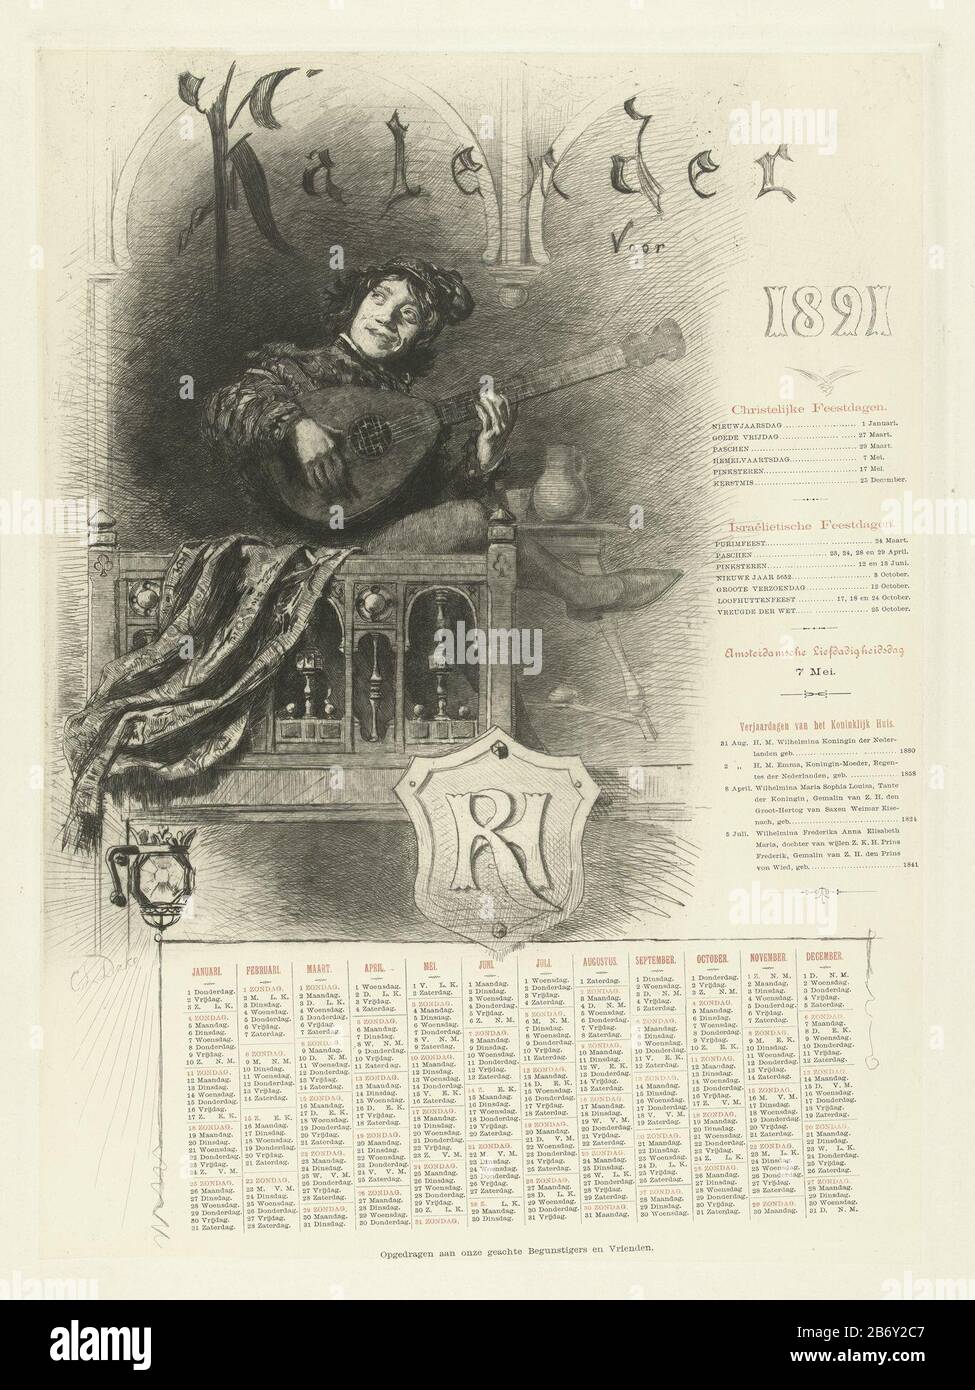 Kalender voor 1891 met vrolijke muzikant Kalender voor 1891 (titel op object) Calendar for 1891 with joyful man dressed in seventeenth century costume, playing on a lute. Some holidays are specifically mentioned and in the calendar, except months and days, abbreviations indicate the moon phases. On a shield is a monogram R & H referring to the organization that the calendar dedicated to her patrons and friends thus opschrift. Manufacturer : printmaker: Carel Lodewijk Dake (listed property) to design: Frans Hals Post production: Netherlands Date: 1890 - 1891 Physical characteristics: etching, d Stock Photo